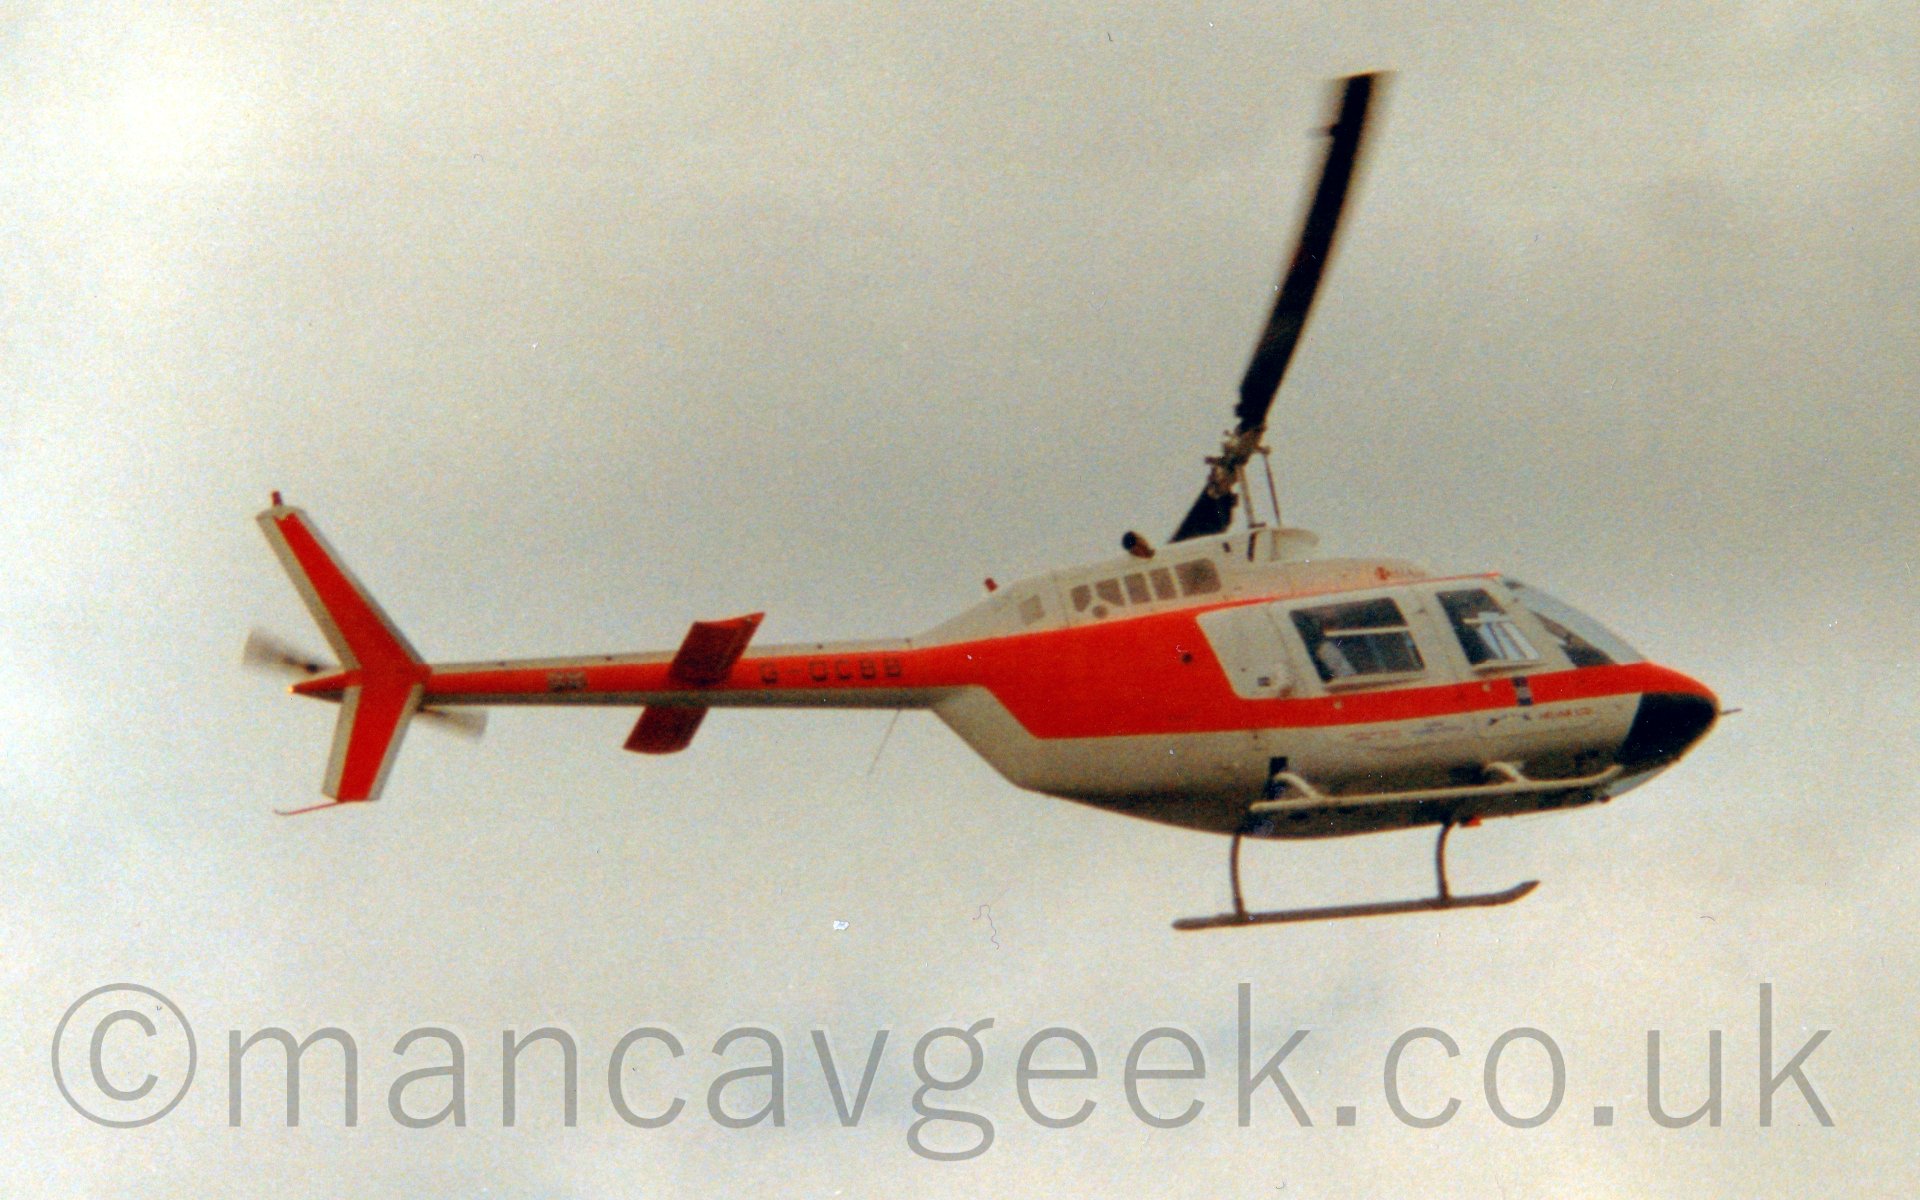 Side view of a helicopter flying from left to right at low level. It's body is mostly cream, with reddish-orange stripe running from the nose and up in to the tail boom, where it covers most of the tail. The main and tail rotors appear to be almost frozen in place. Behind, the sky is a dreary gray.